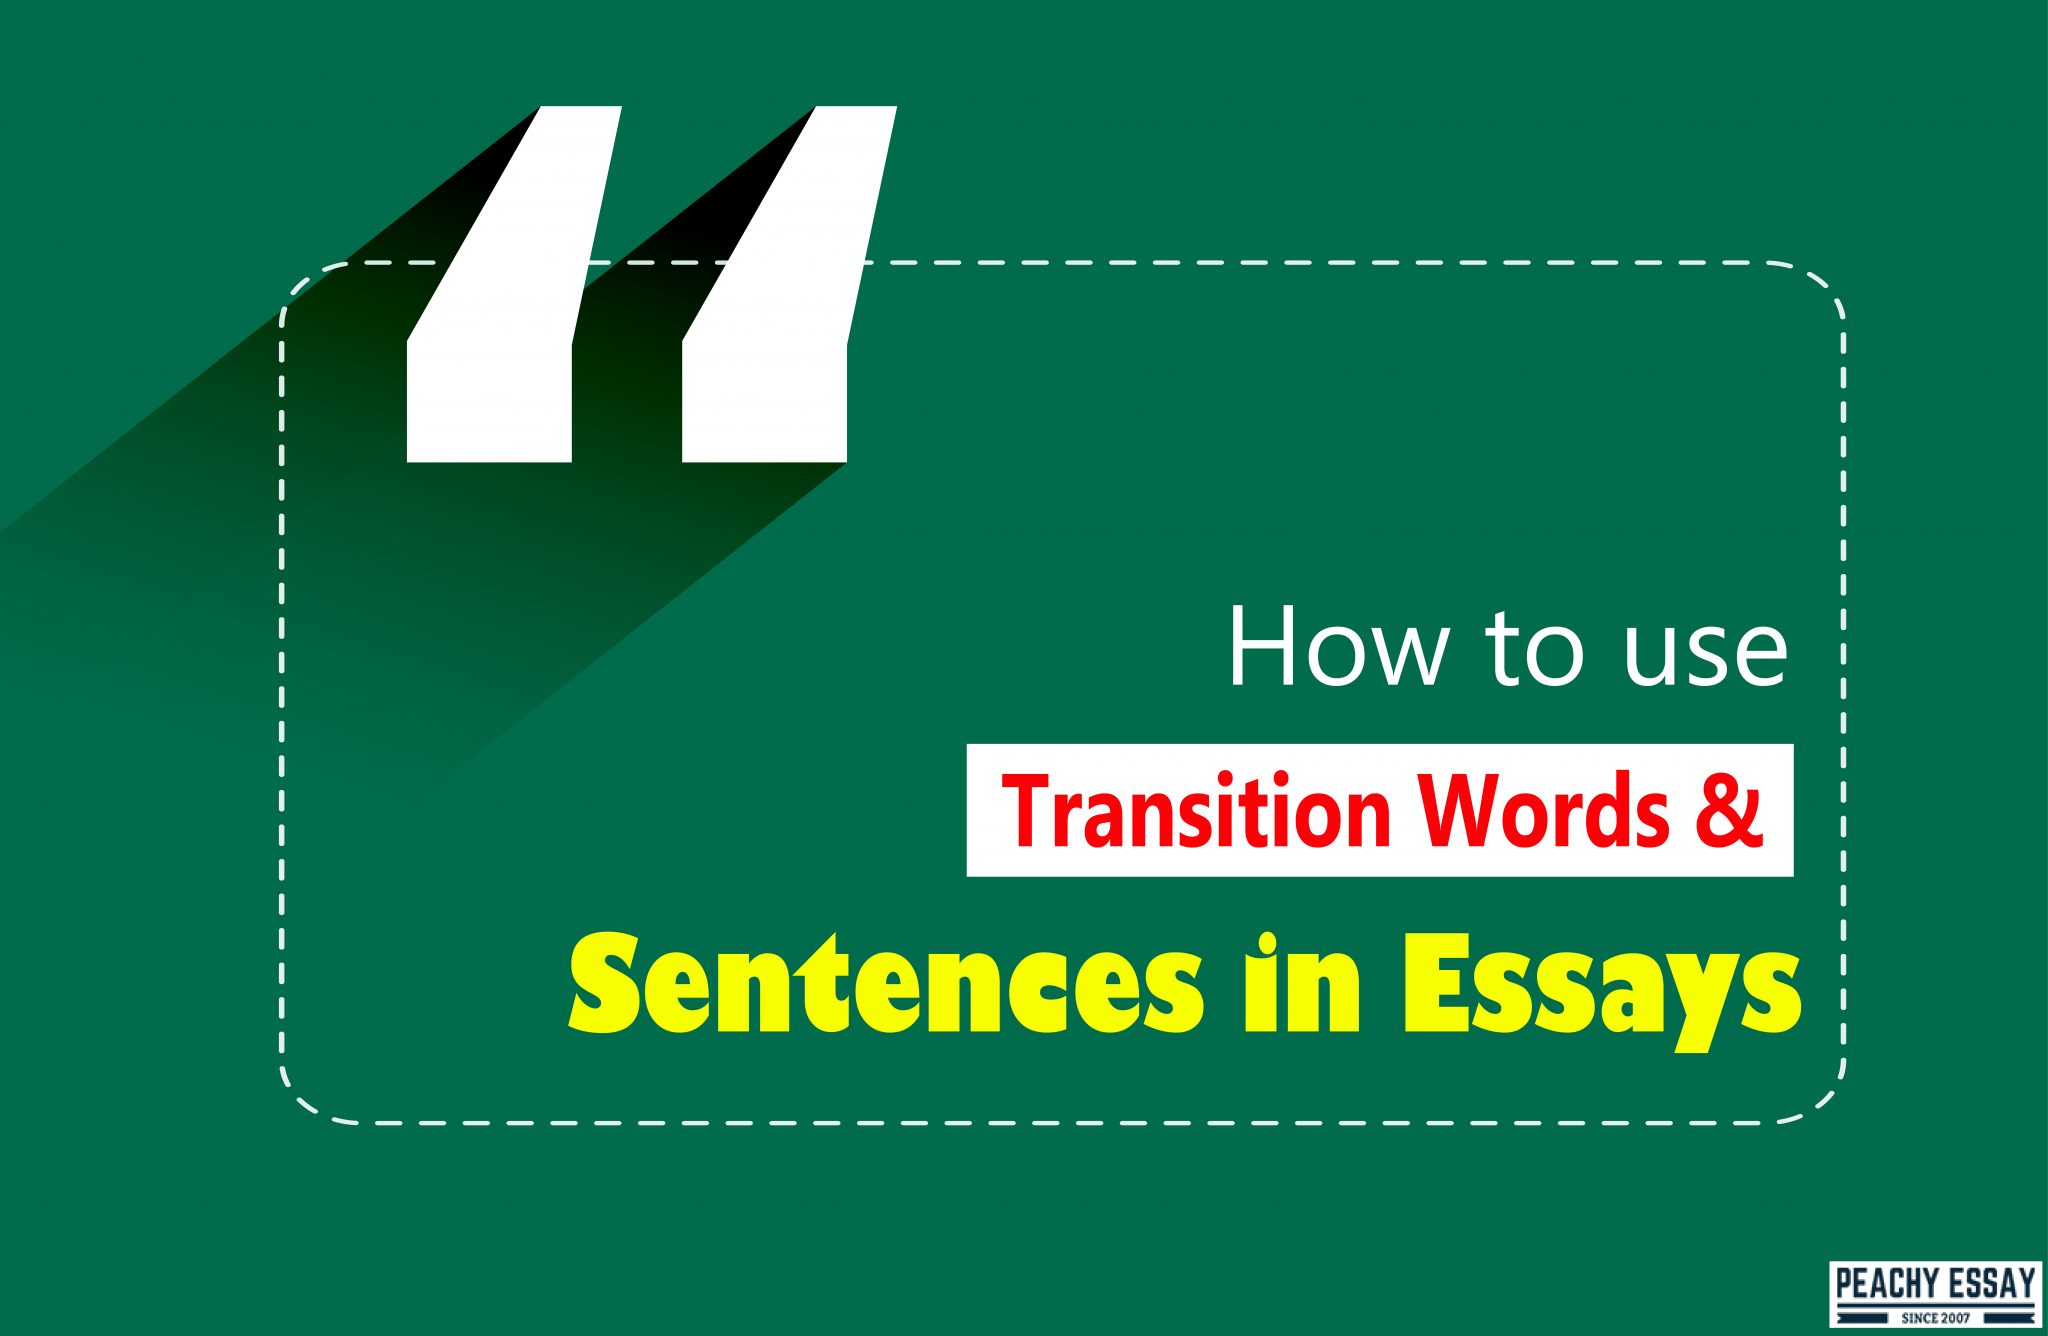 how-to-use-transition-words-and-sentences-in-essays